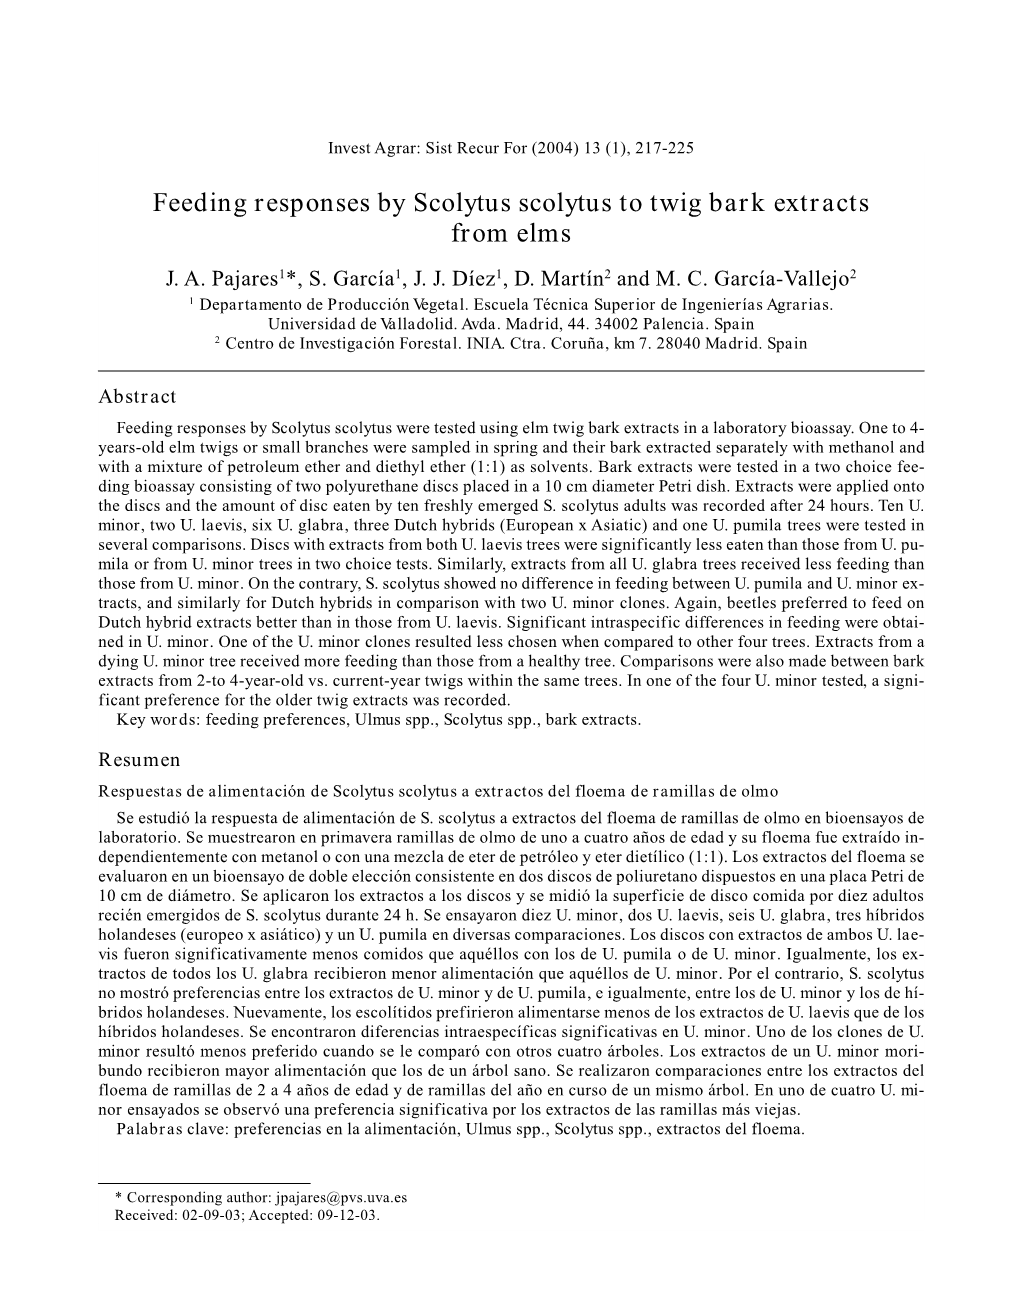 Feeding Responses by Scolytus Scolytus to Twig Bark Extracts from Elms J